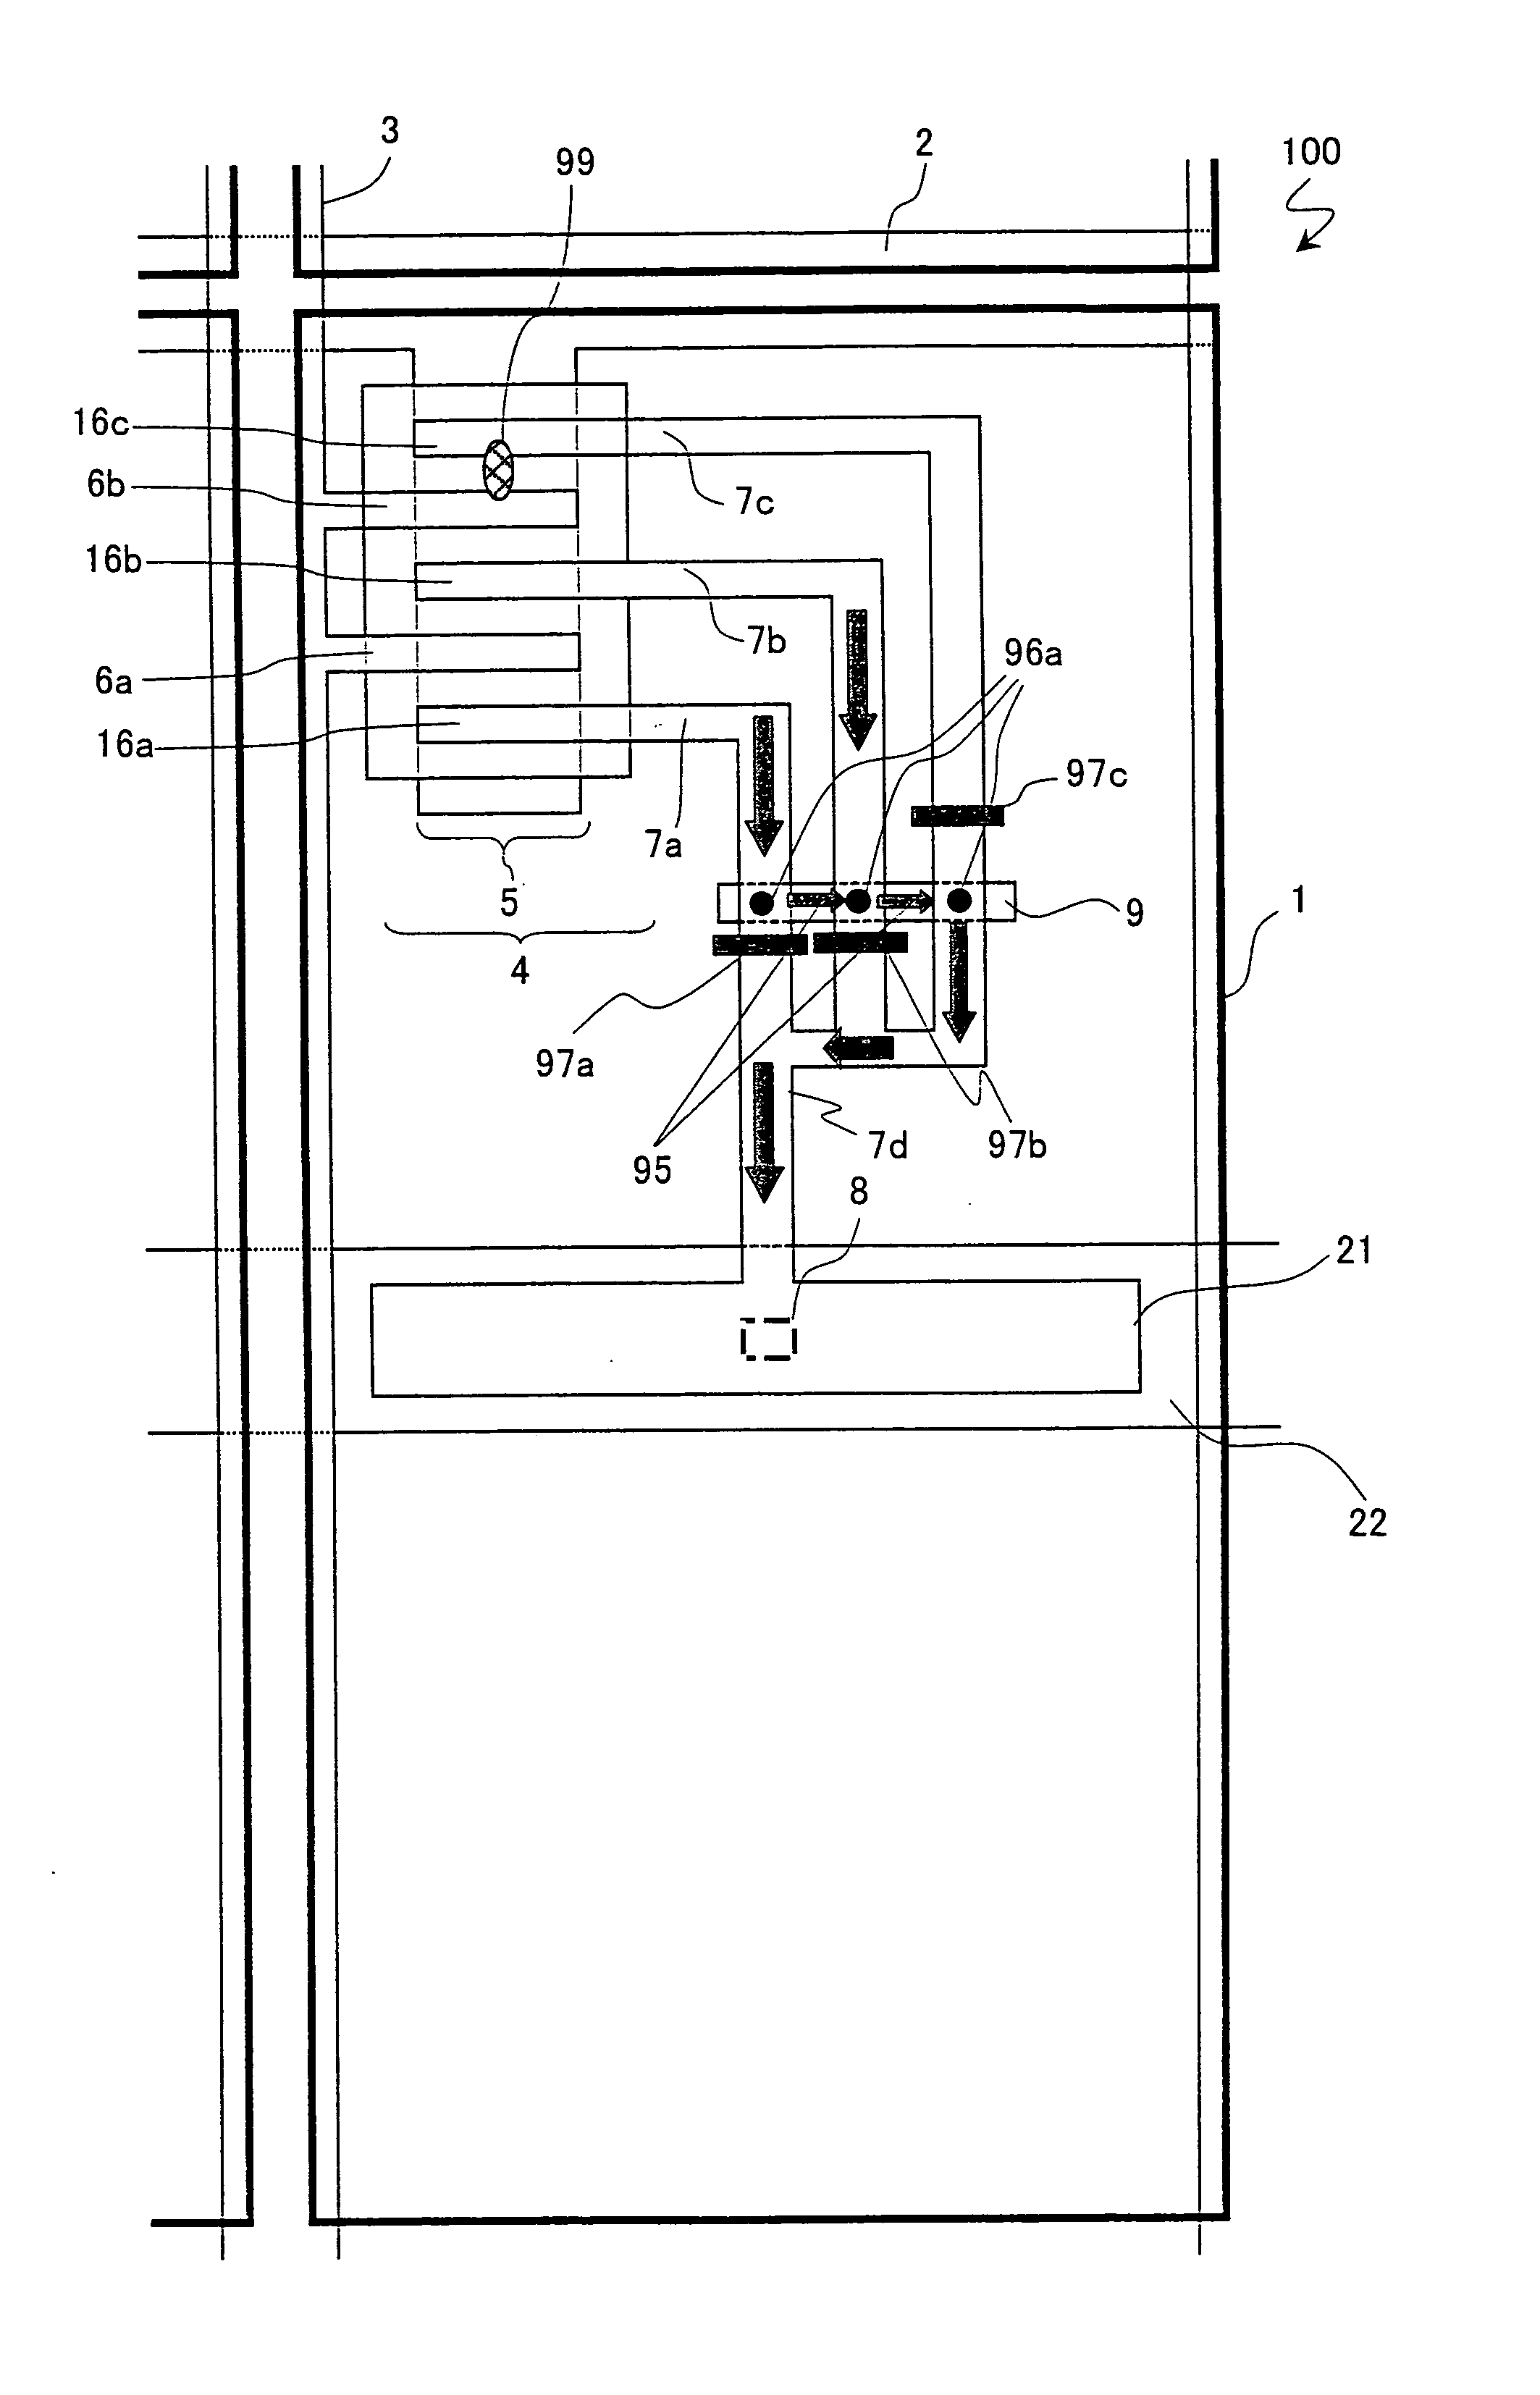 Active Matrix Substrate, Display Apparatus, and Pixel Deffect Correction Method